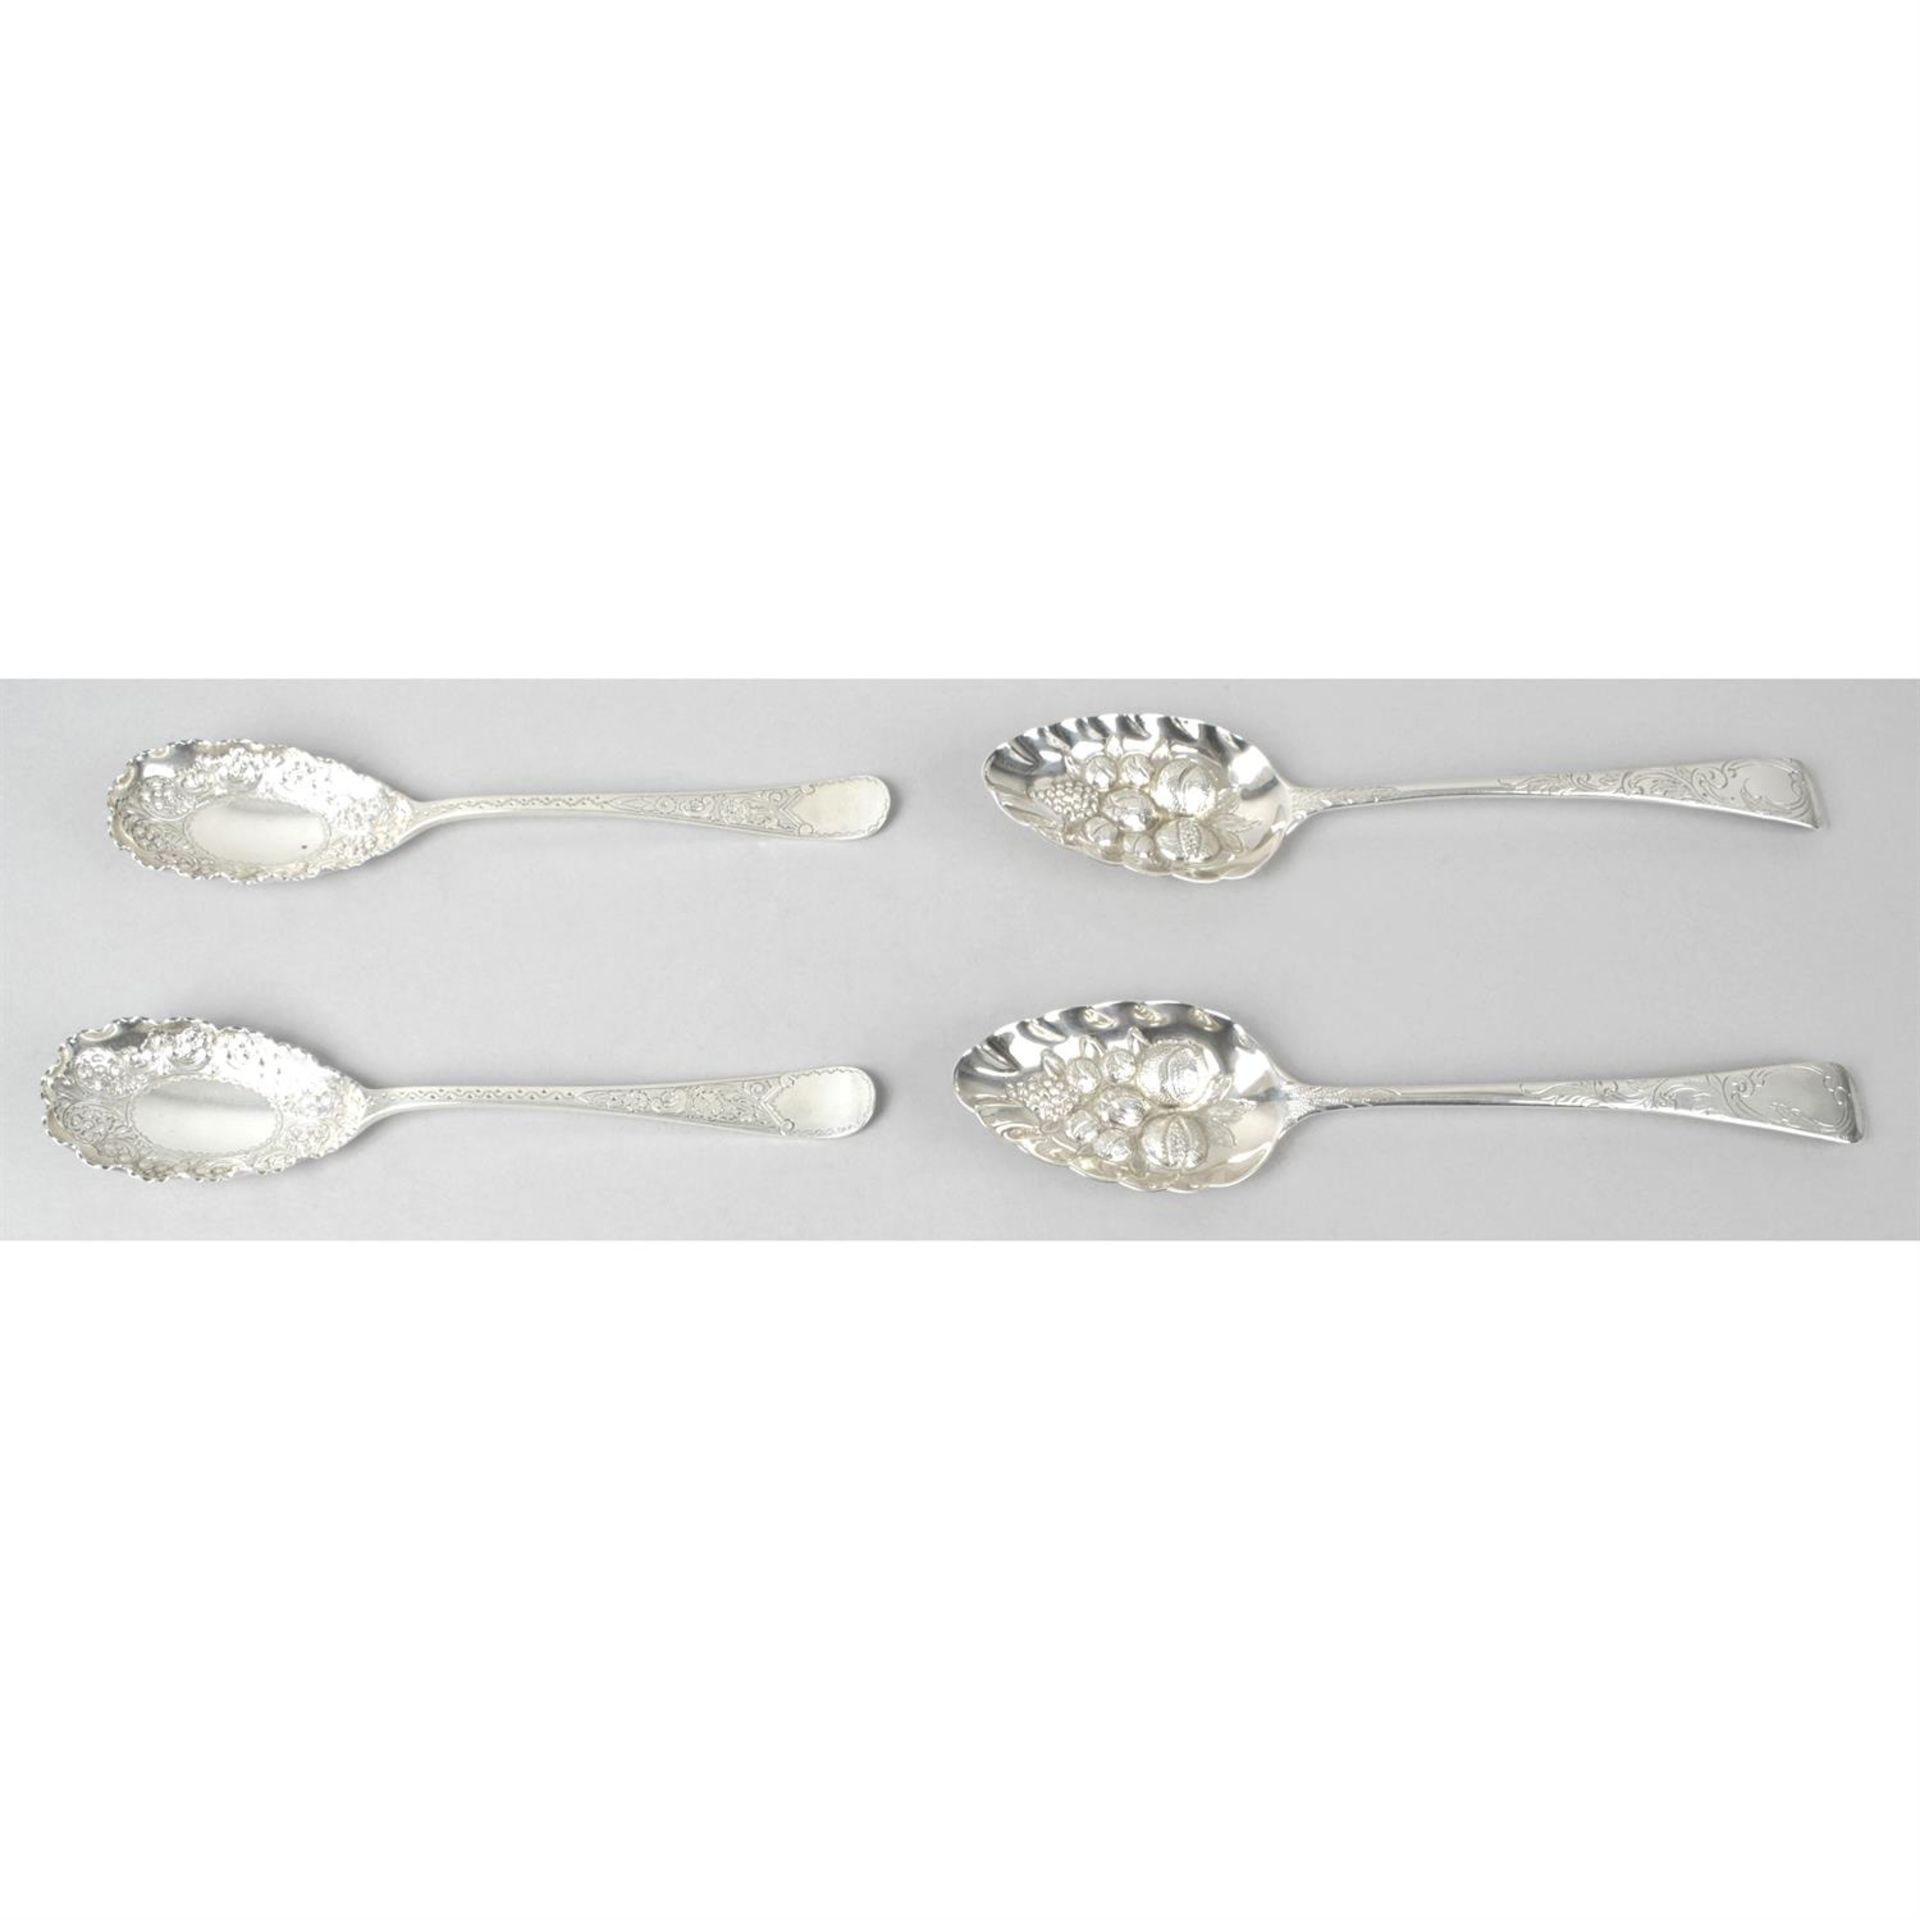 A pair of George IV silver 'berry' table spoons, together with a pair of late Victorian silver